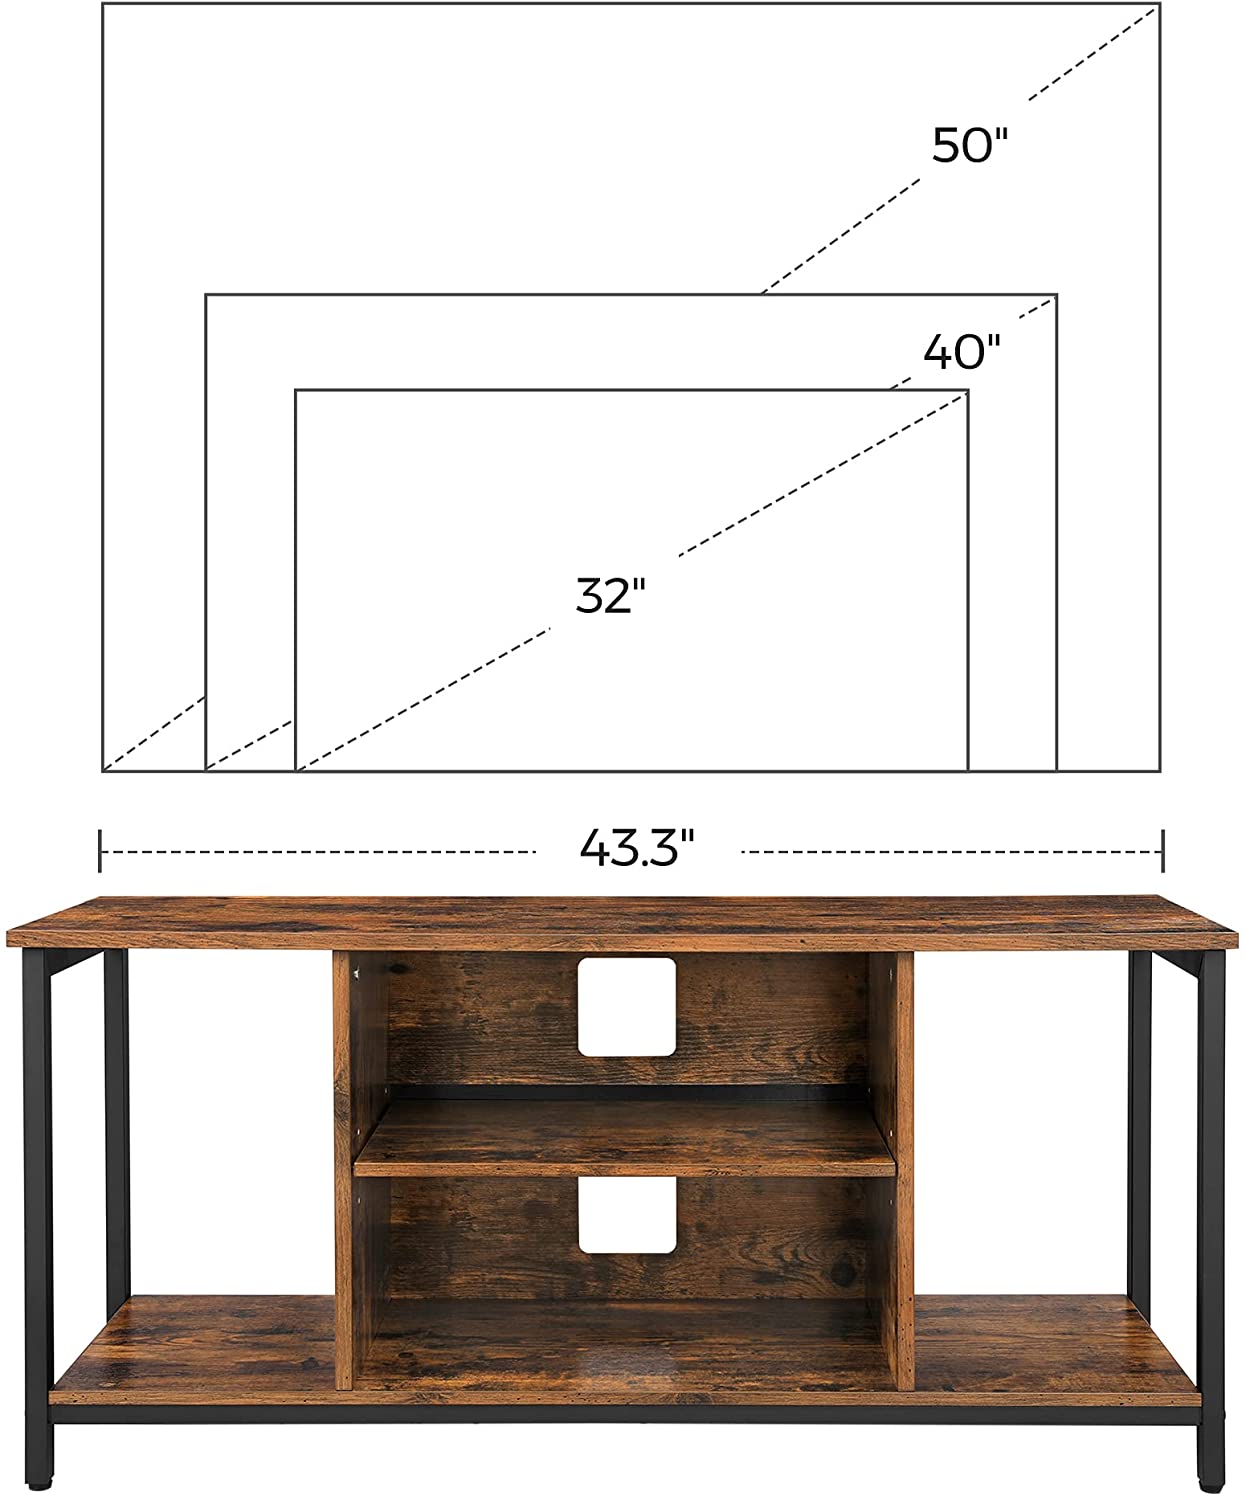 Classical Rustic Furniture Wooden Metal Frame TV Table for up to 65-Inch TVs with Three-layer Storage For Living Room